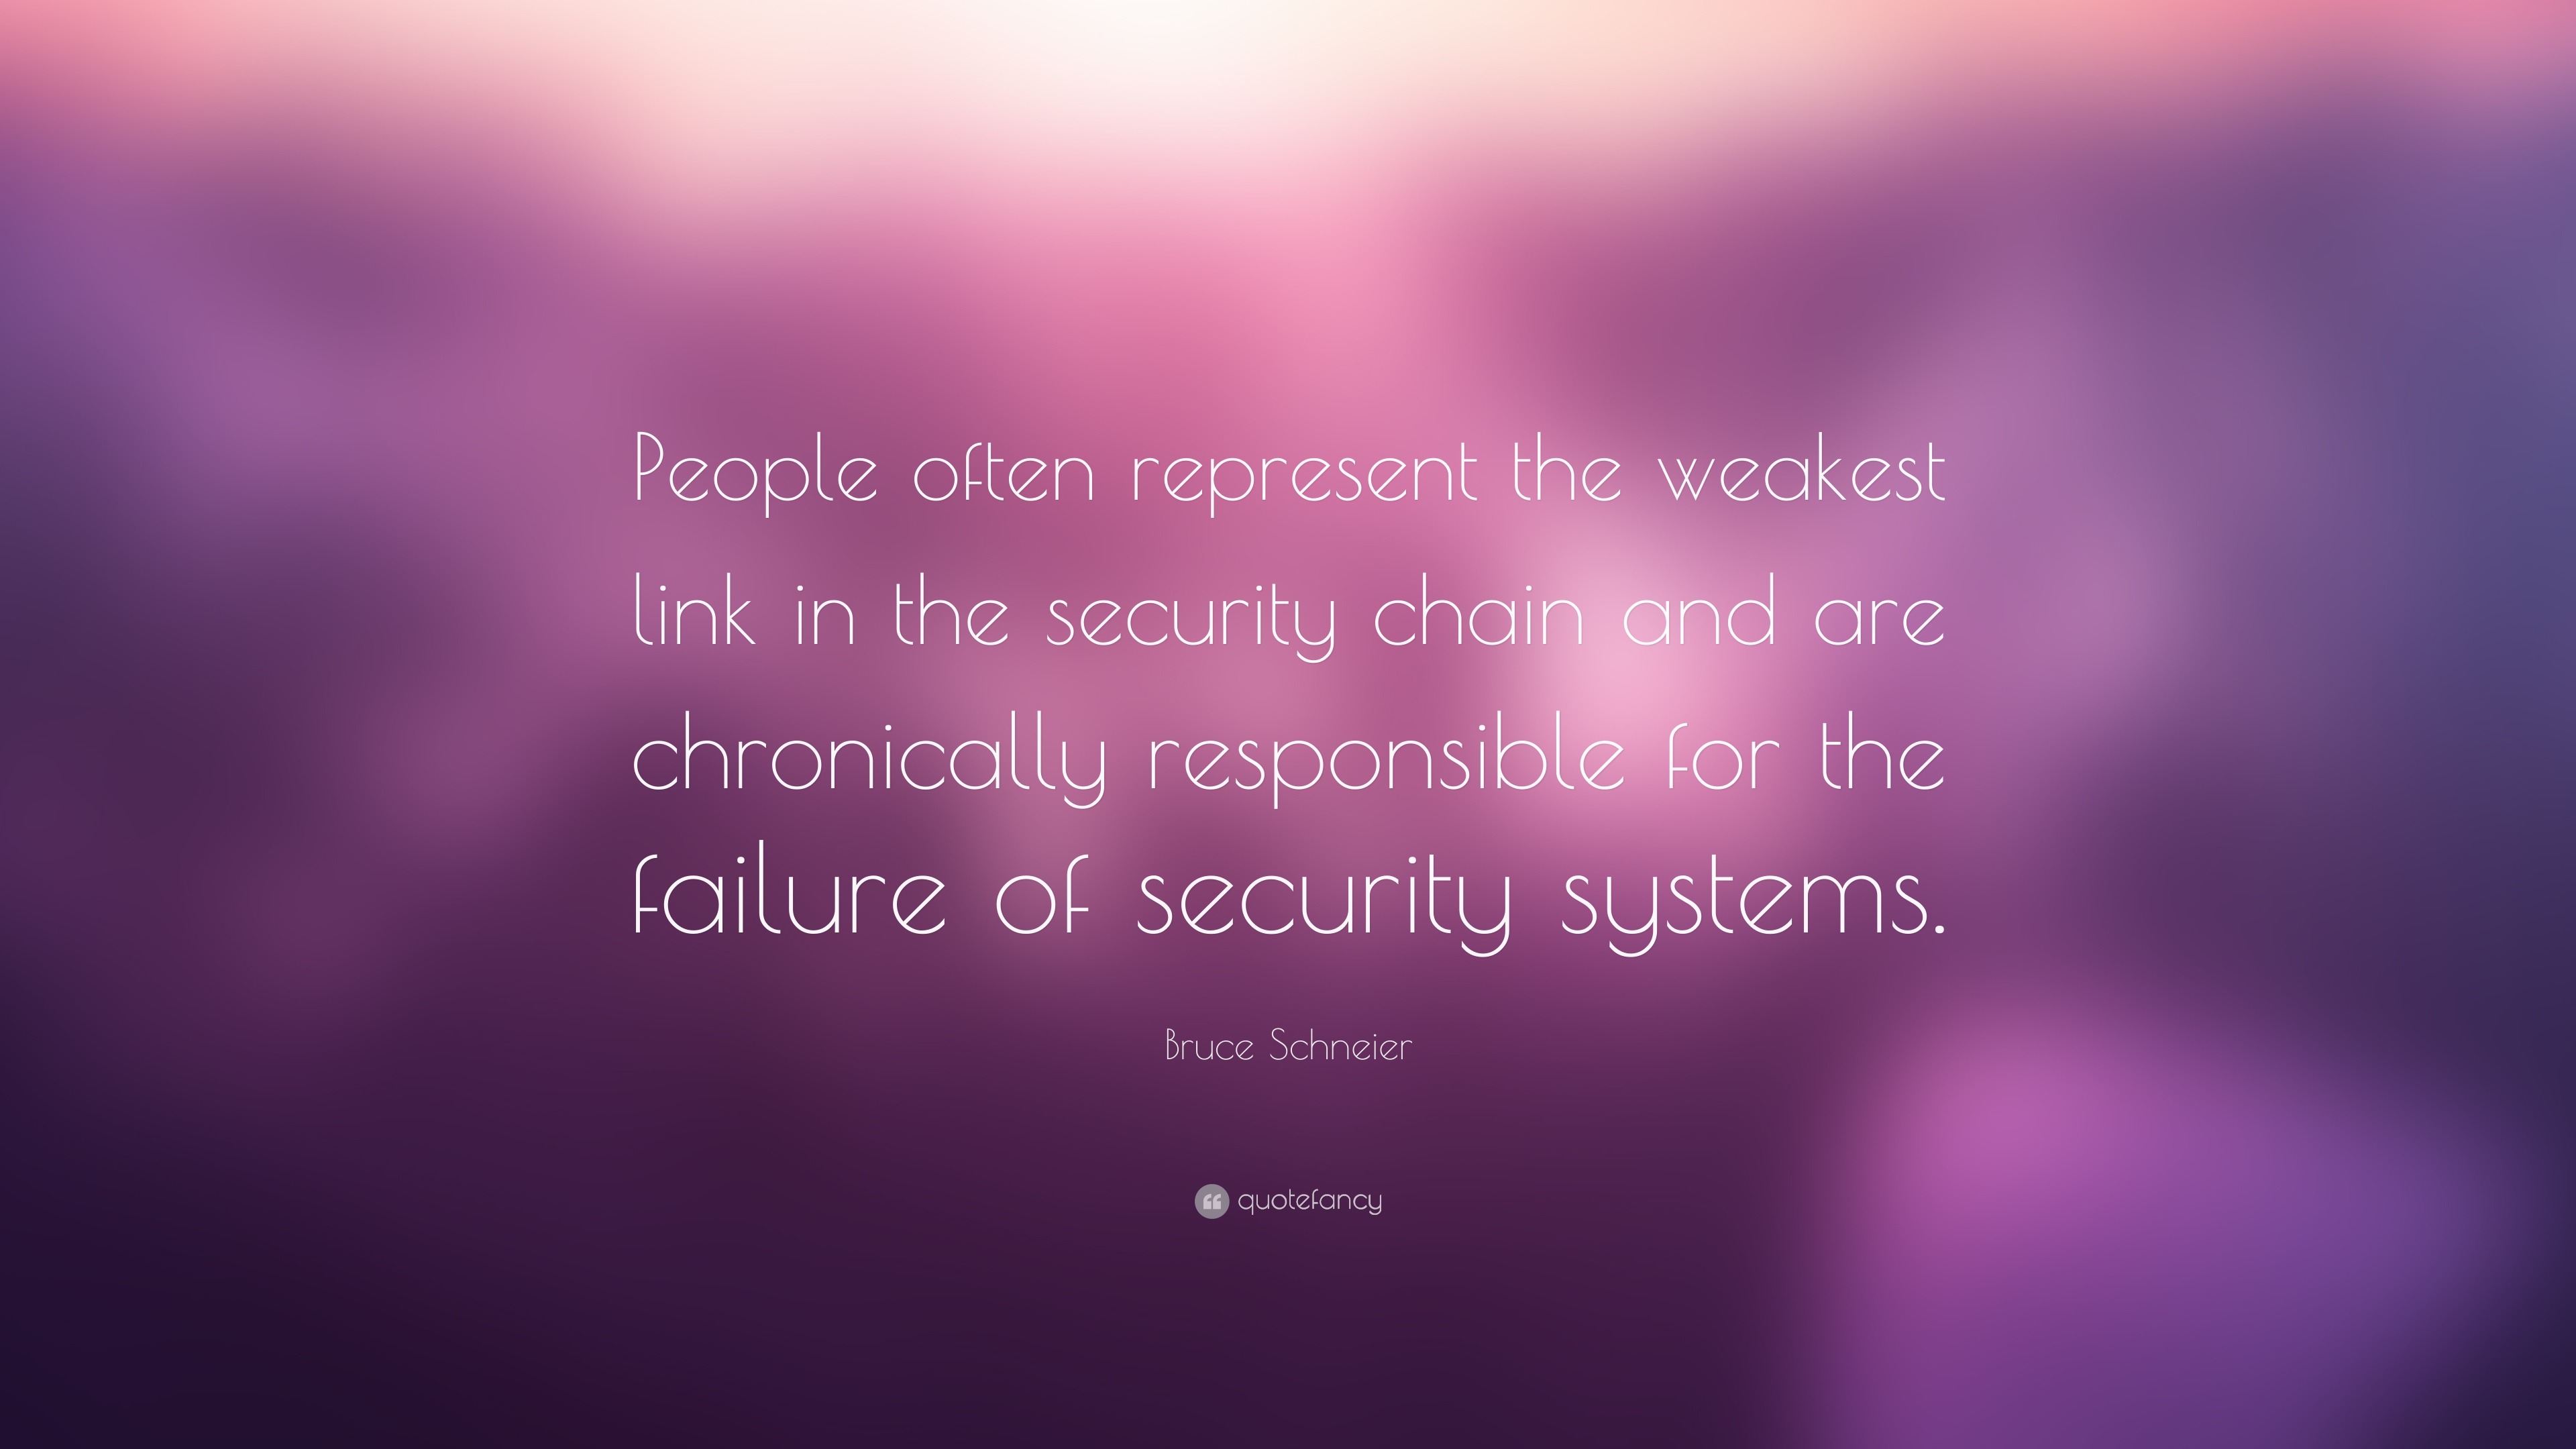 The Important Thing About Security Systems Isn T How They Work